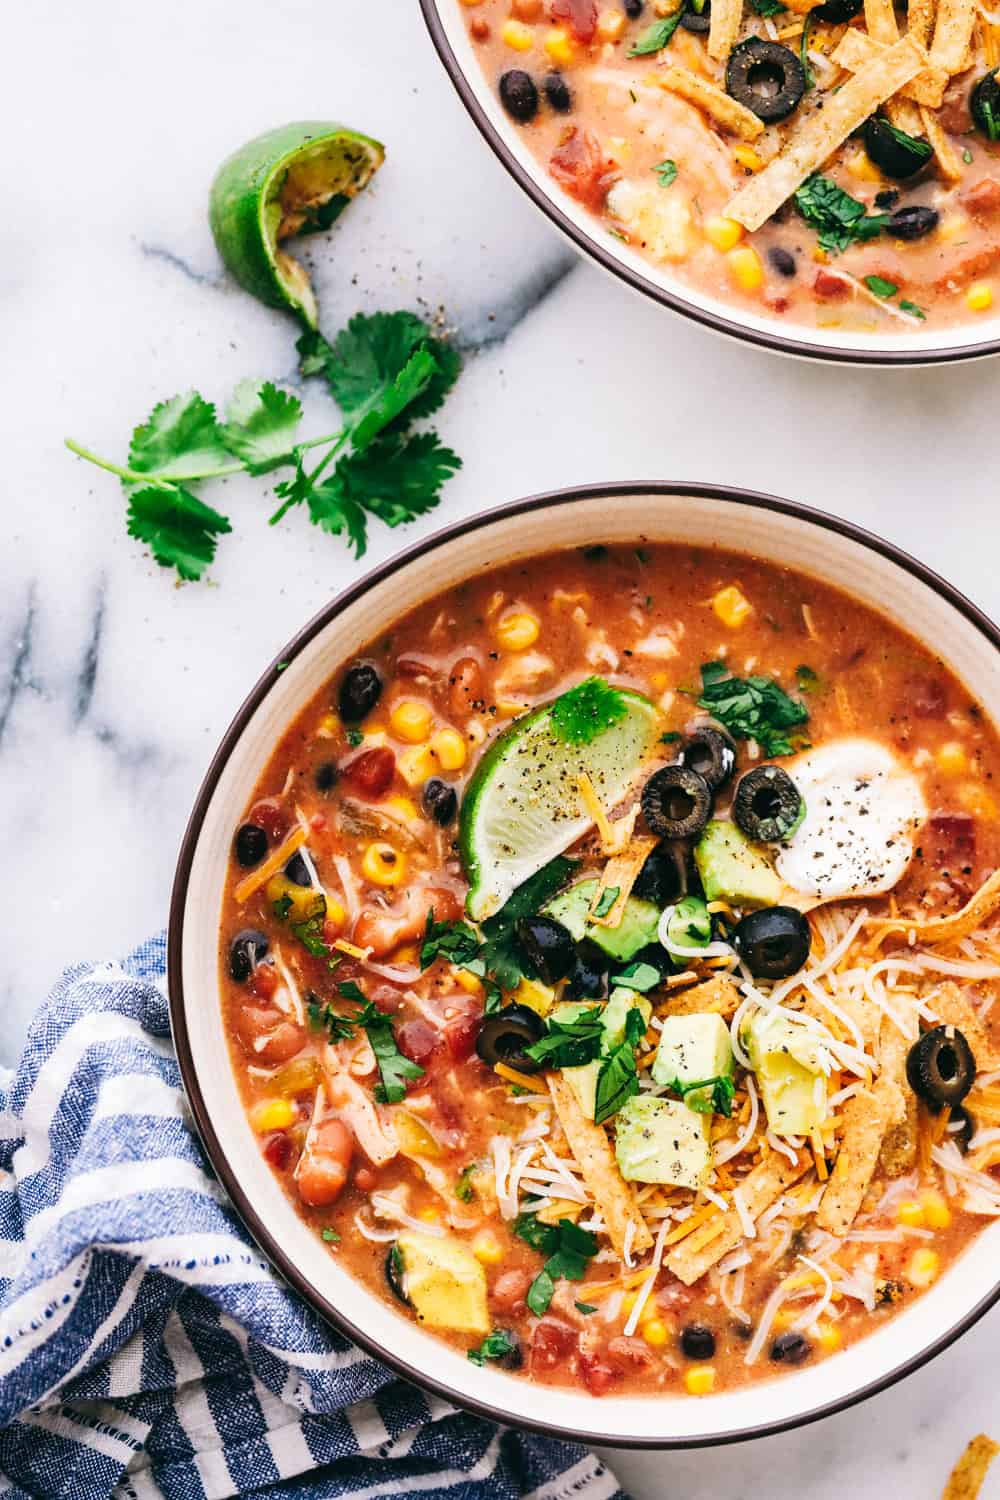 https://therecipecritic.com/wp-content/uploads/2020/03/8_can_taco_soup2.jpg